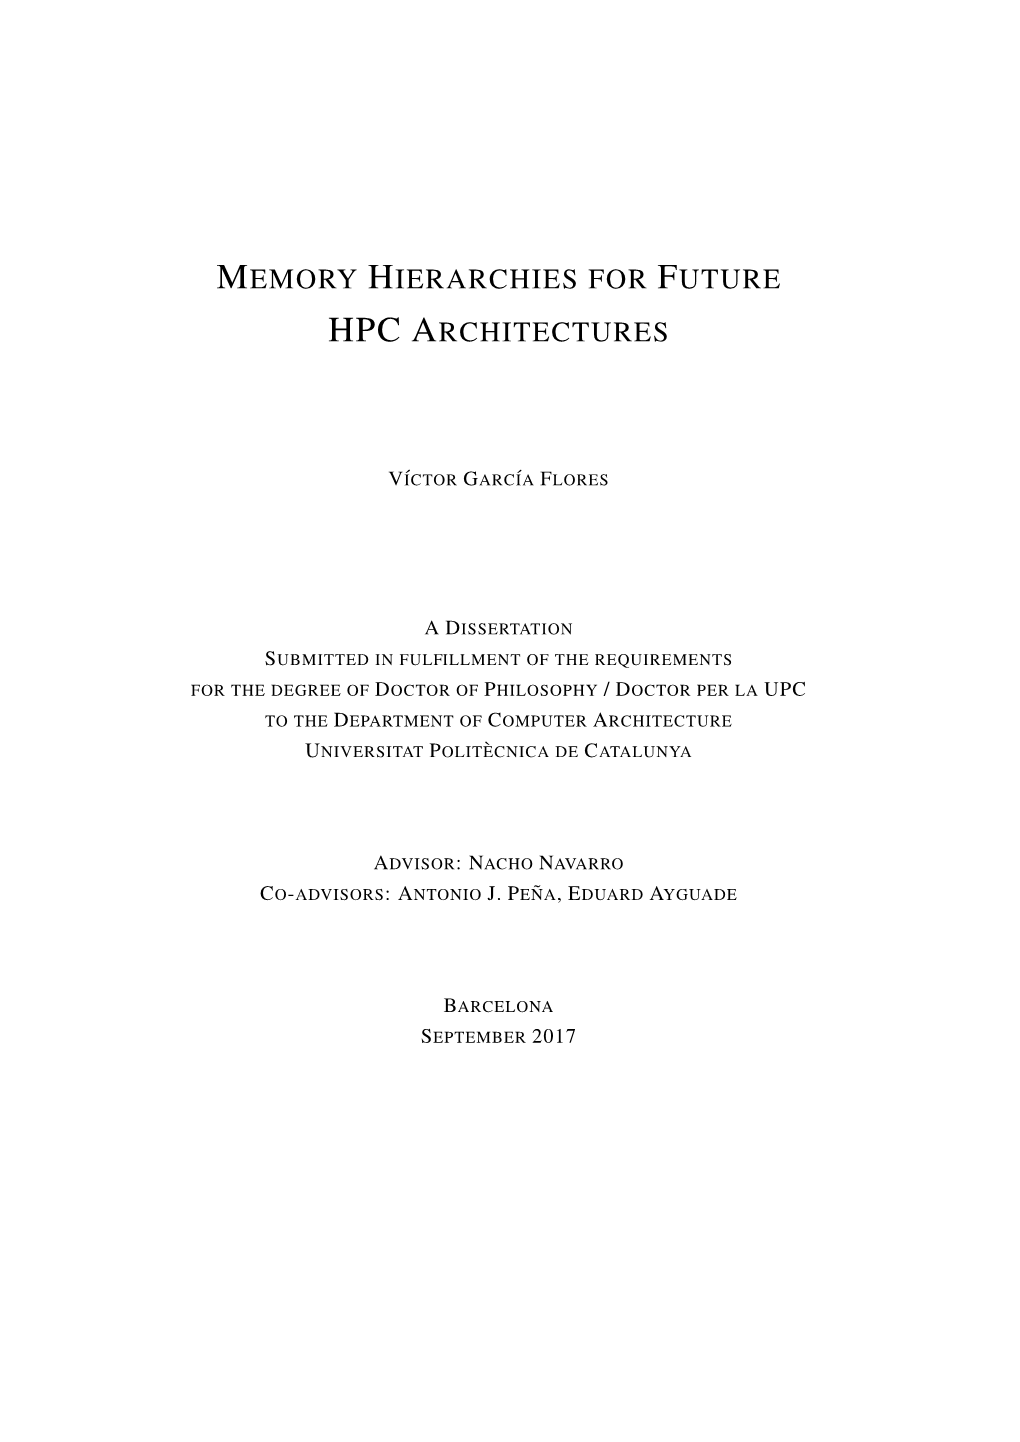 Memory Hierarchies for Future Hpc Architectures